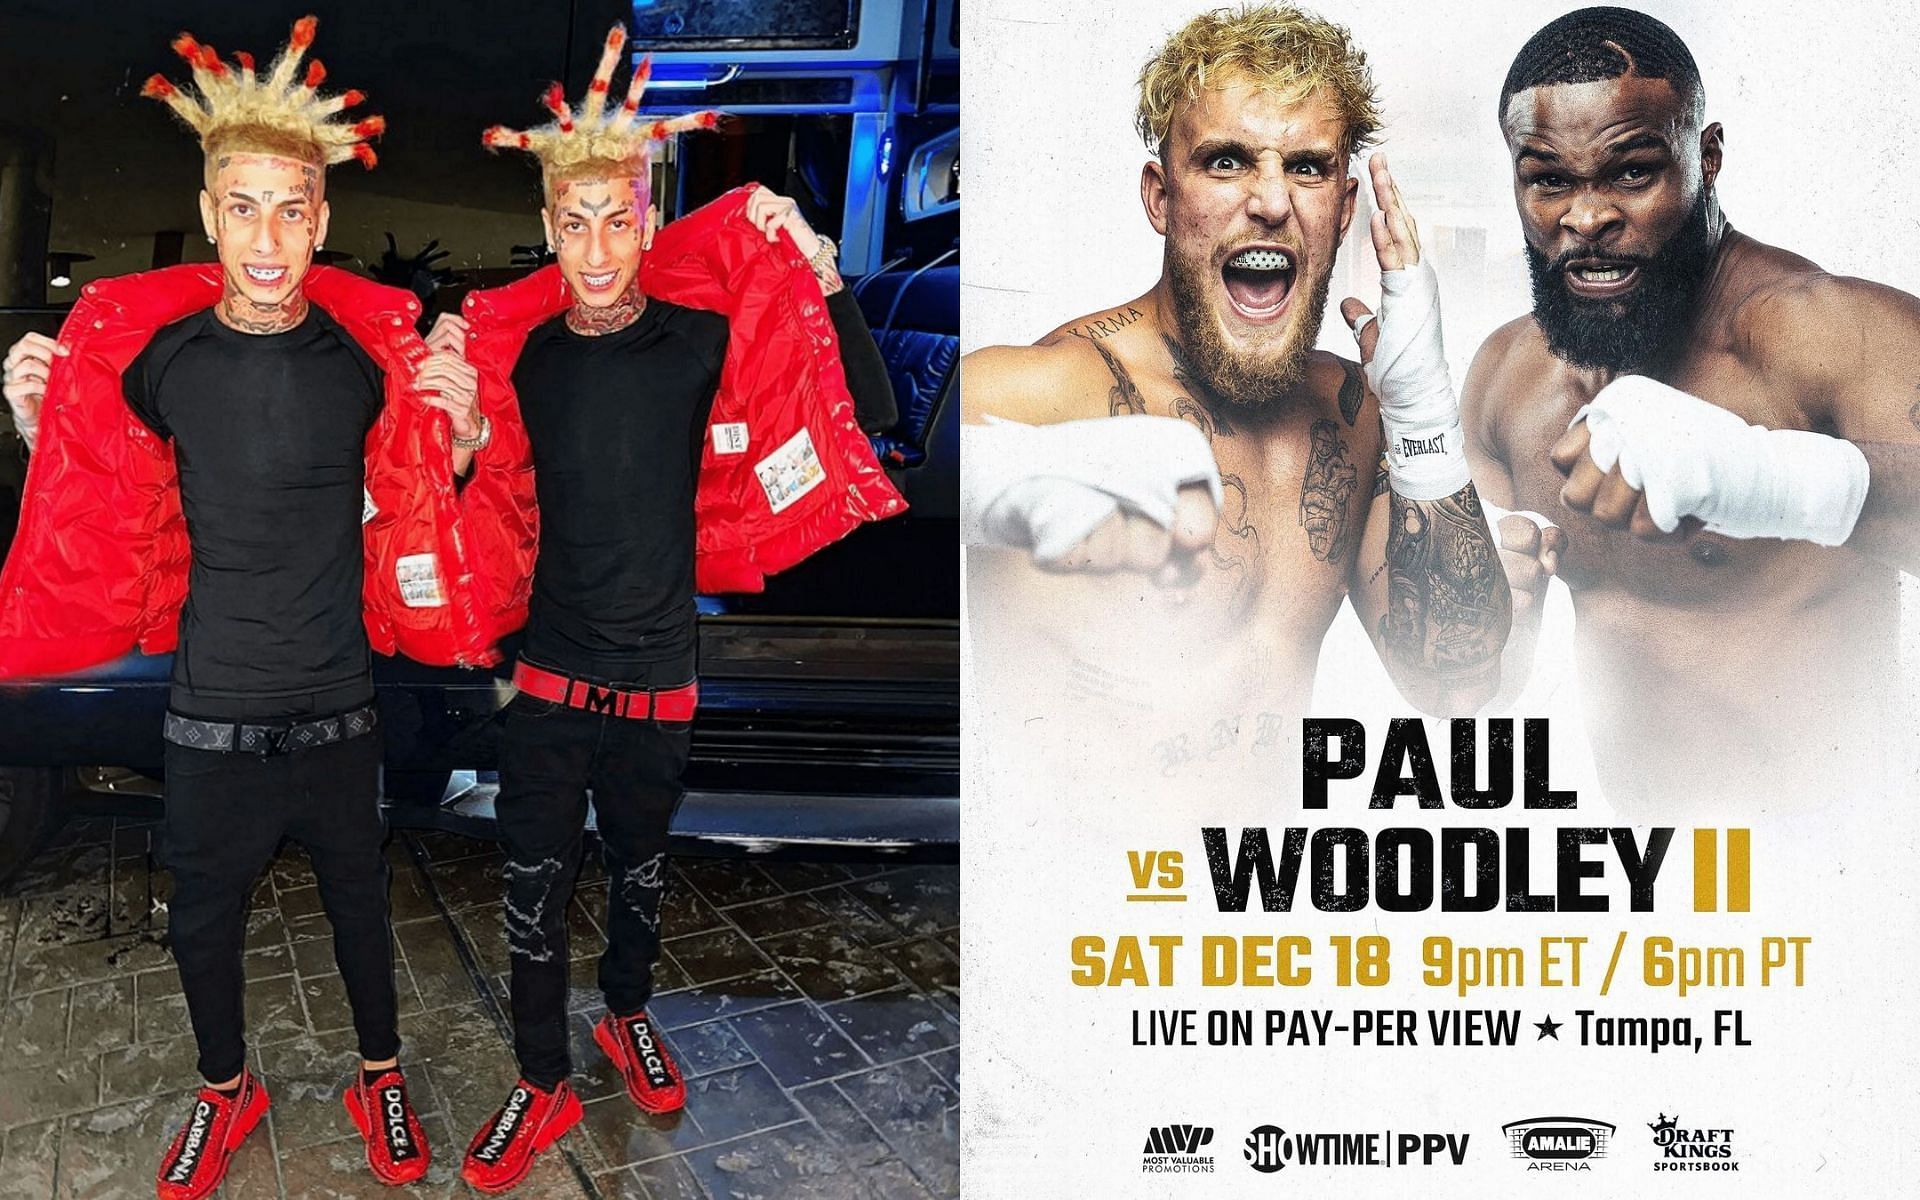 Island Boys (left) and Jake Paul vs Tyron Woodley (right) [Image credits: @twooodley and @flyysoulja on Instagram]